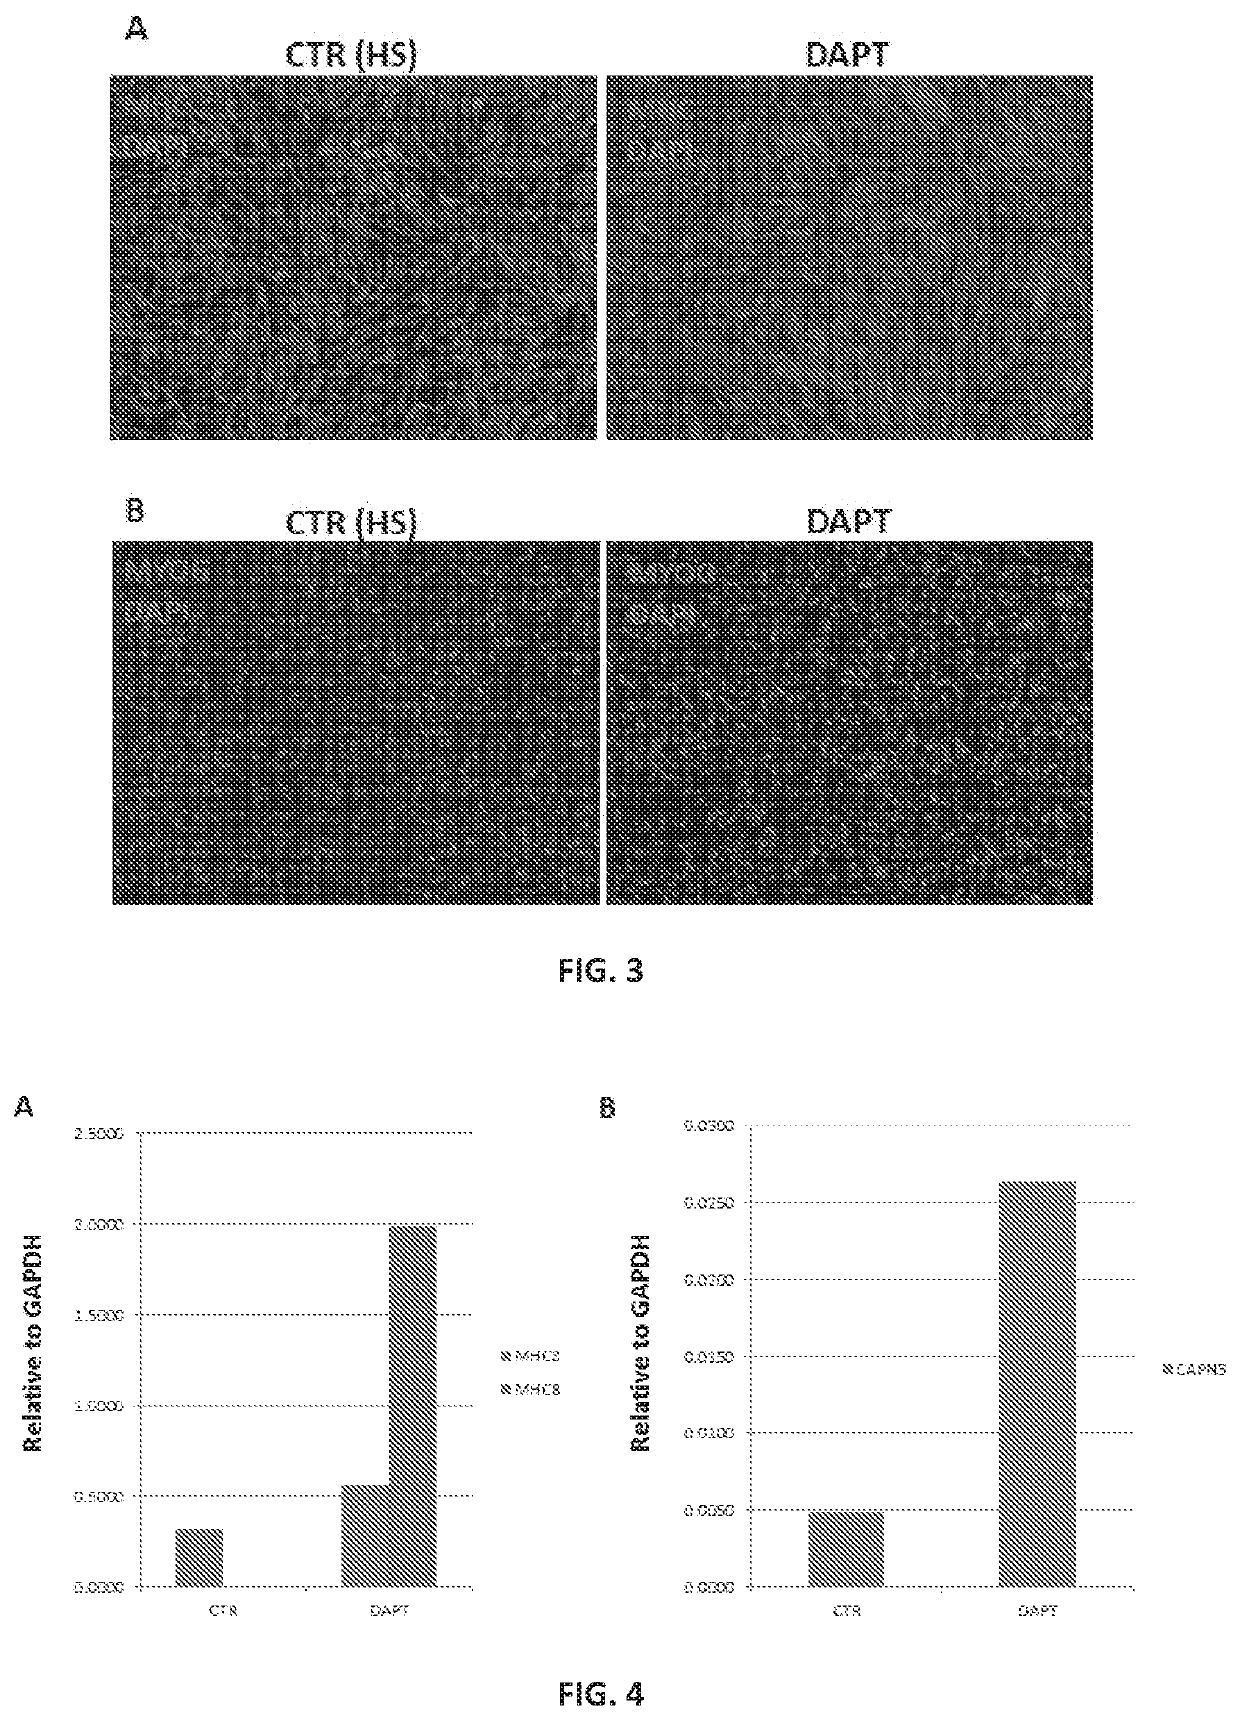 Enhanced differentiation and maturation of pluripotent stem cell-derived myogenic cells